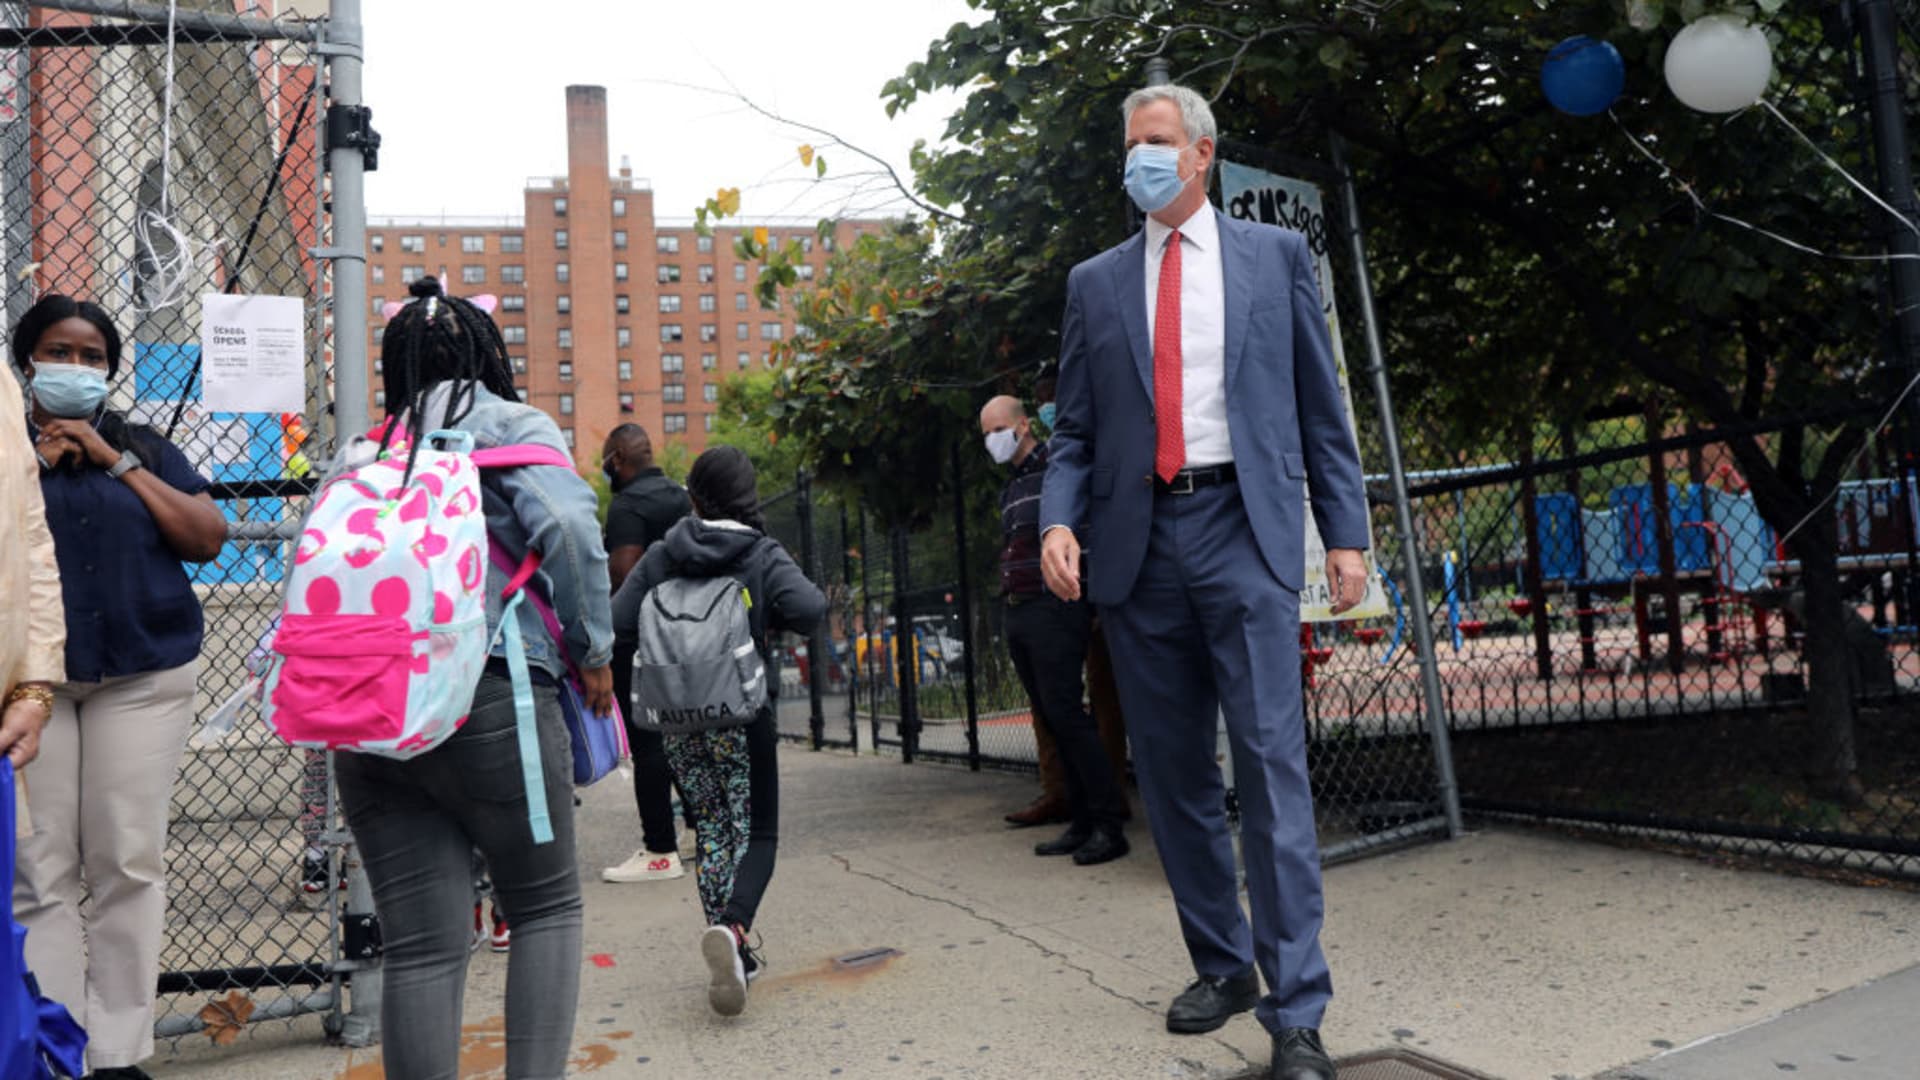 New York City Mayor Bill de Blasio stands at P.S. 188 as he welcomes elementary school students back to the city's public schools for in-person learning on September 29, 2020 in New York City.